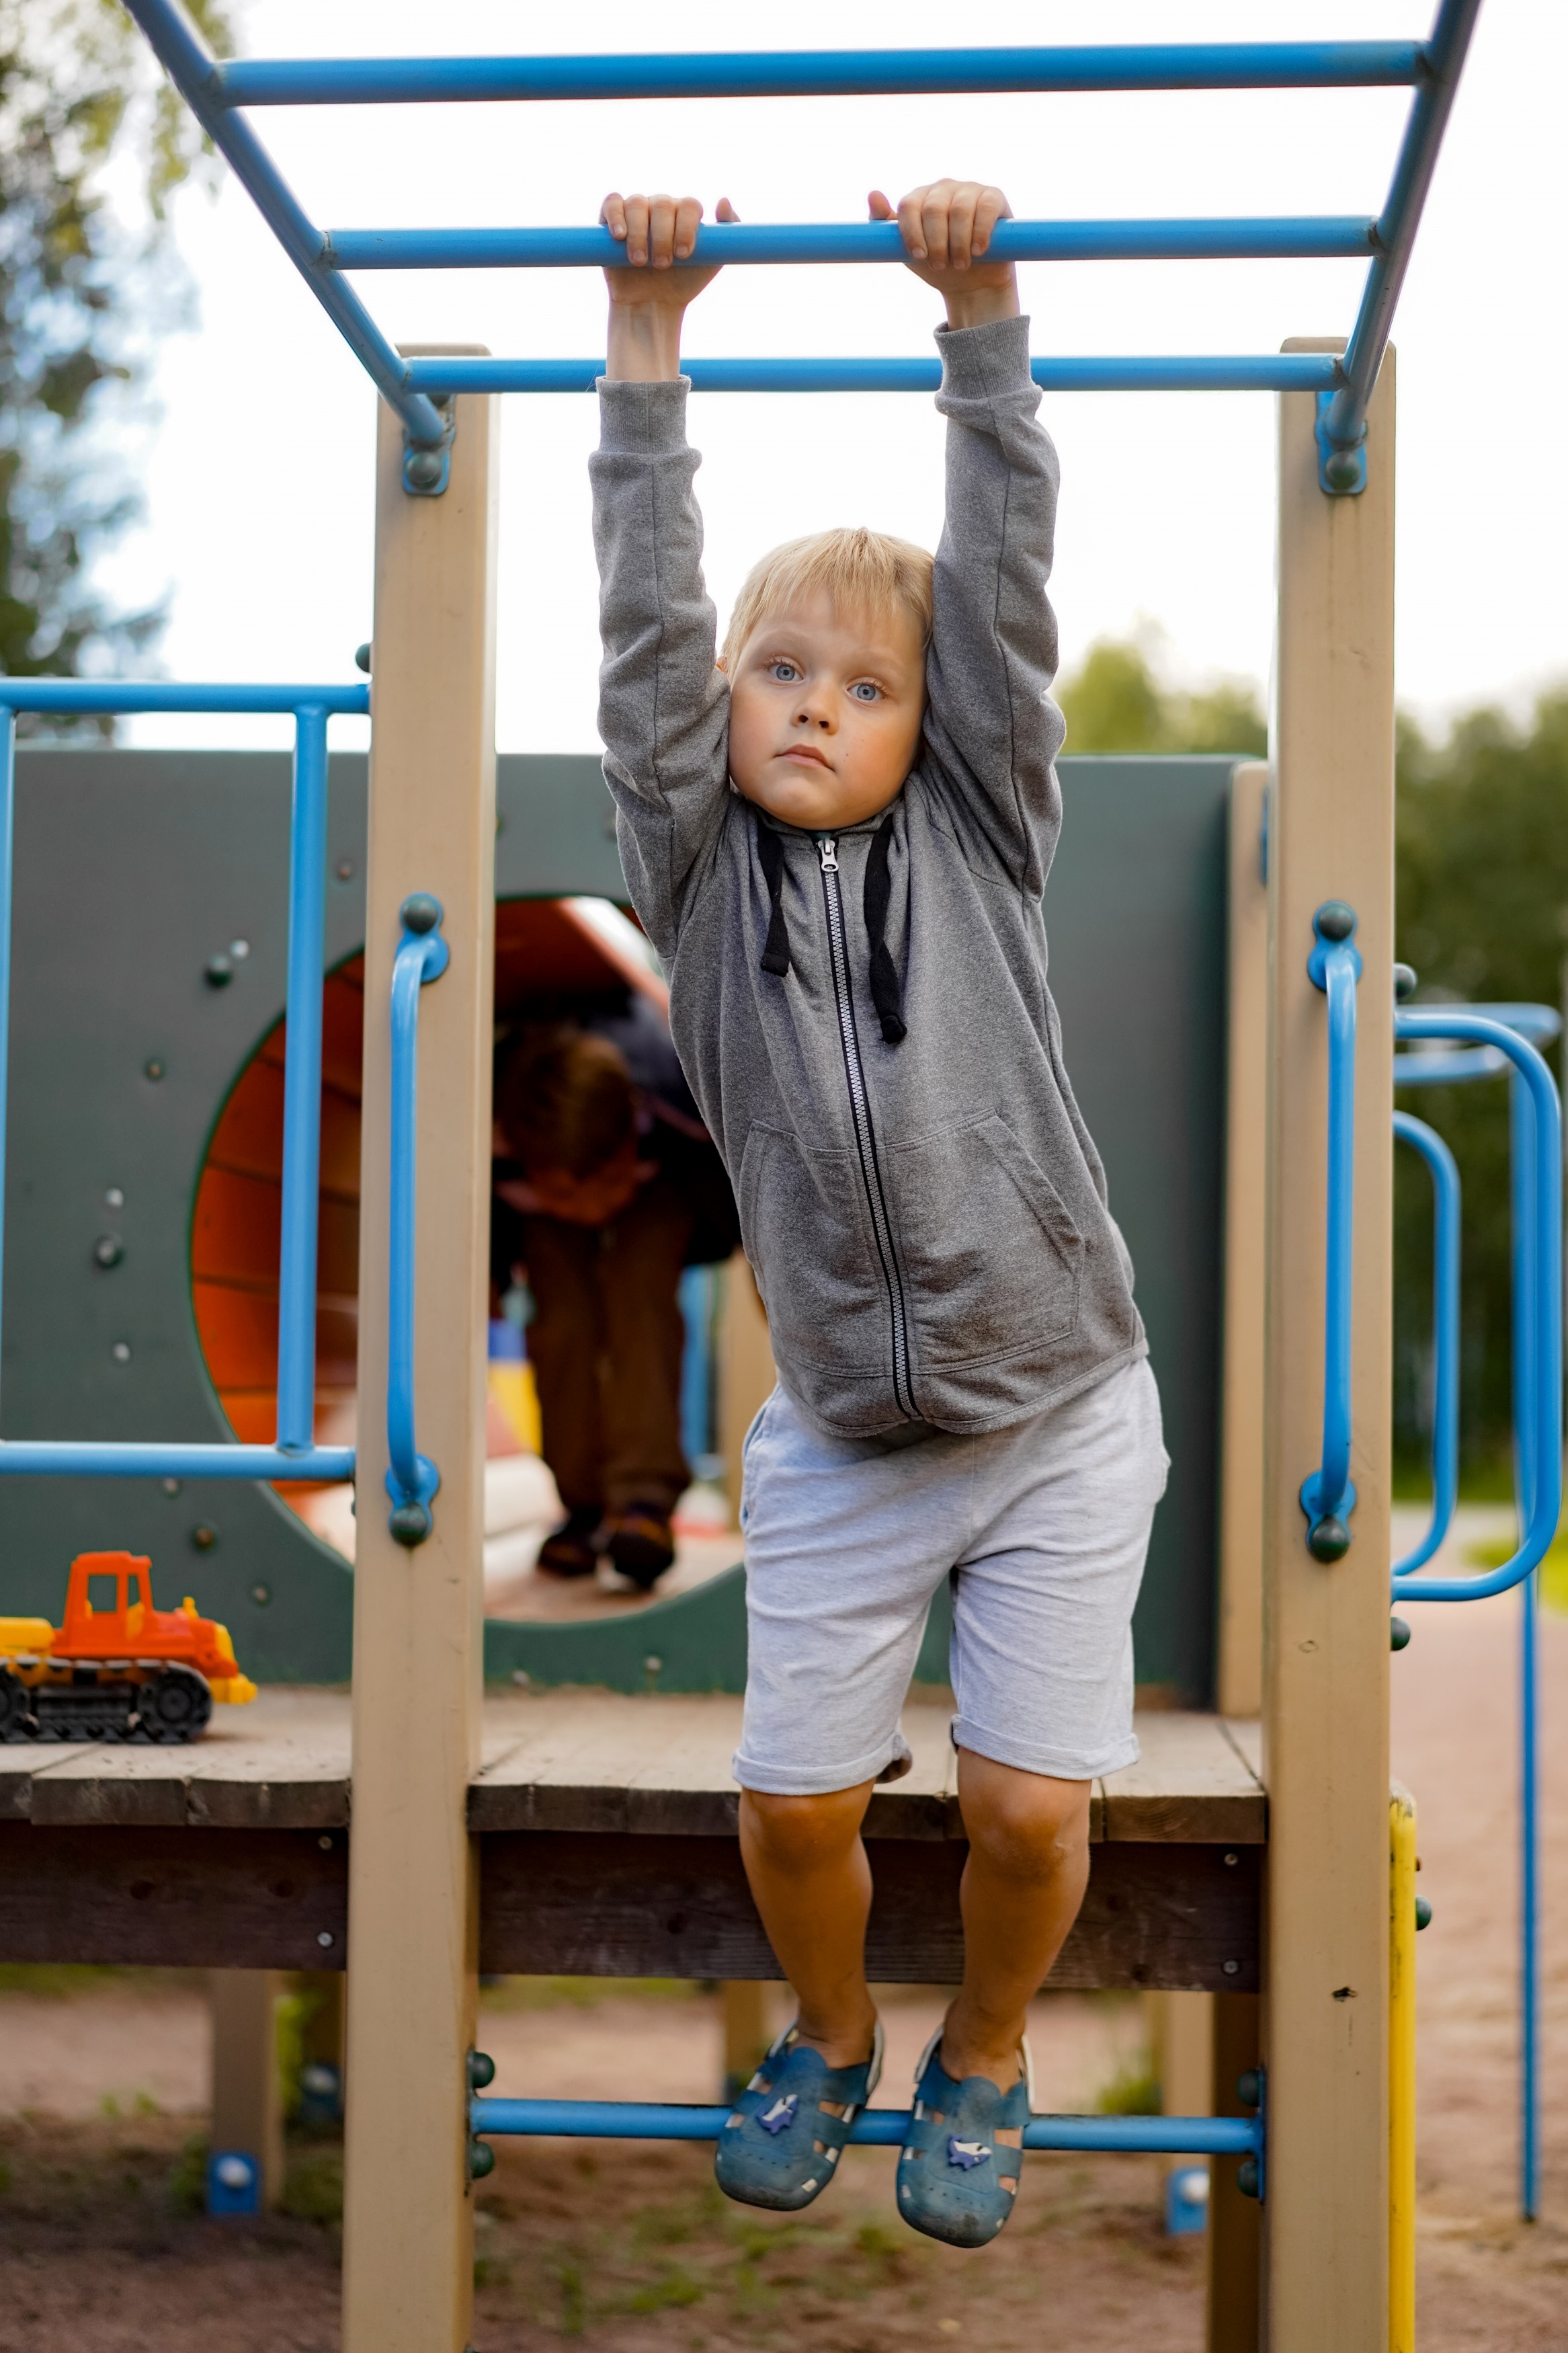 Kids' Fitness Fun: Engaging Exercises for Active Play - HAJEX Fitness